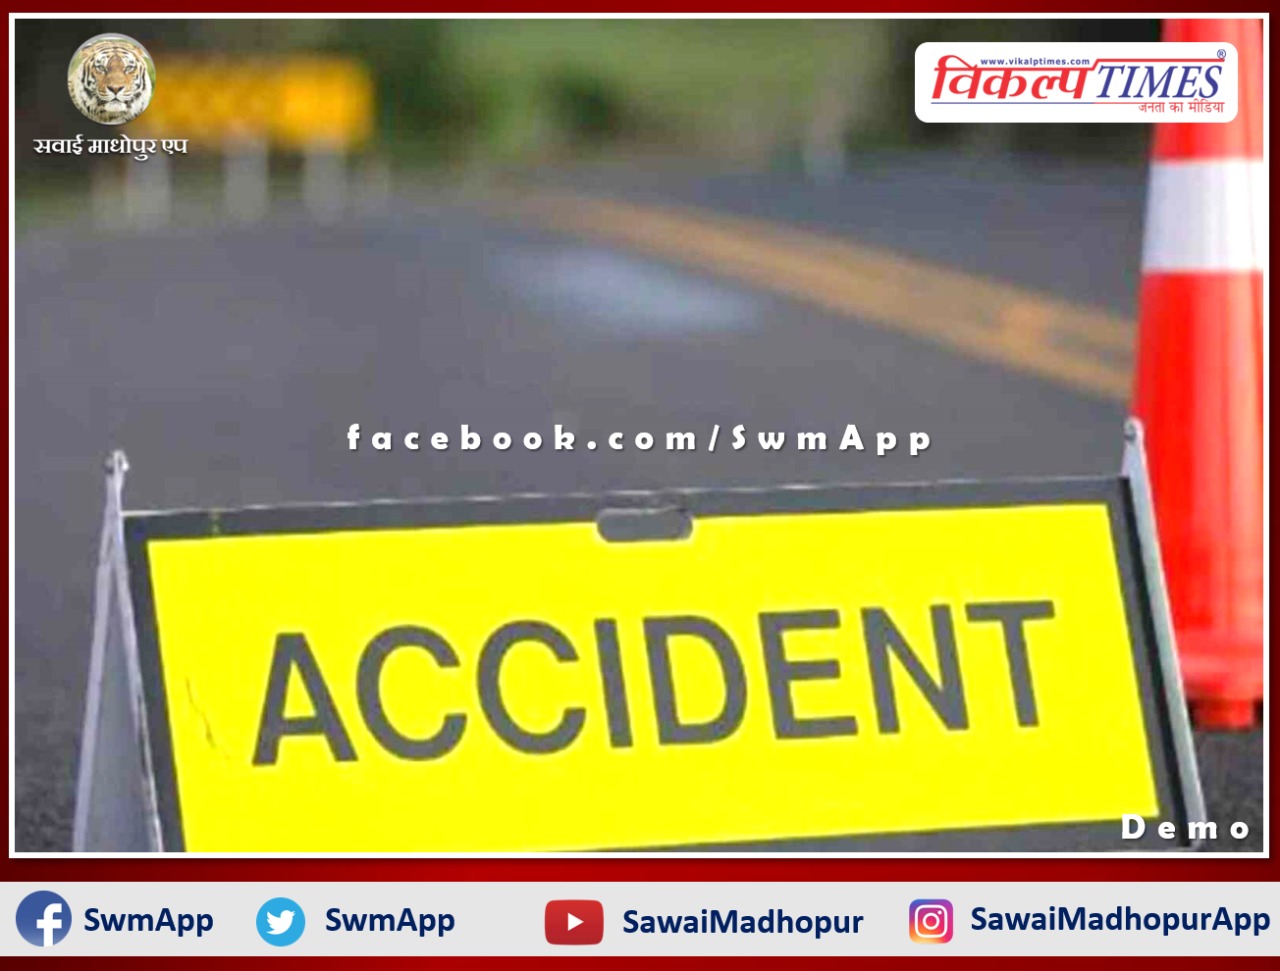 Accident News From Nagaur Rajasthan